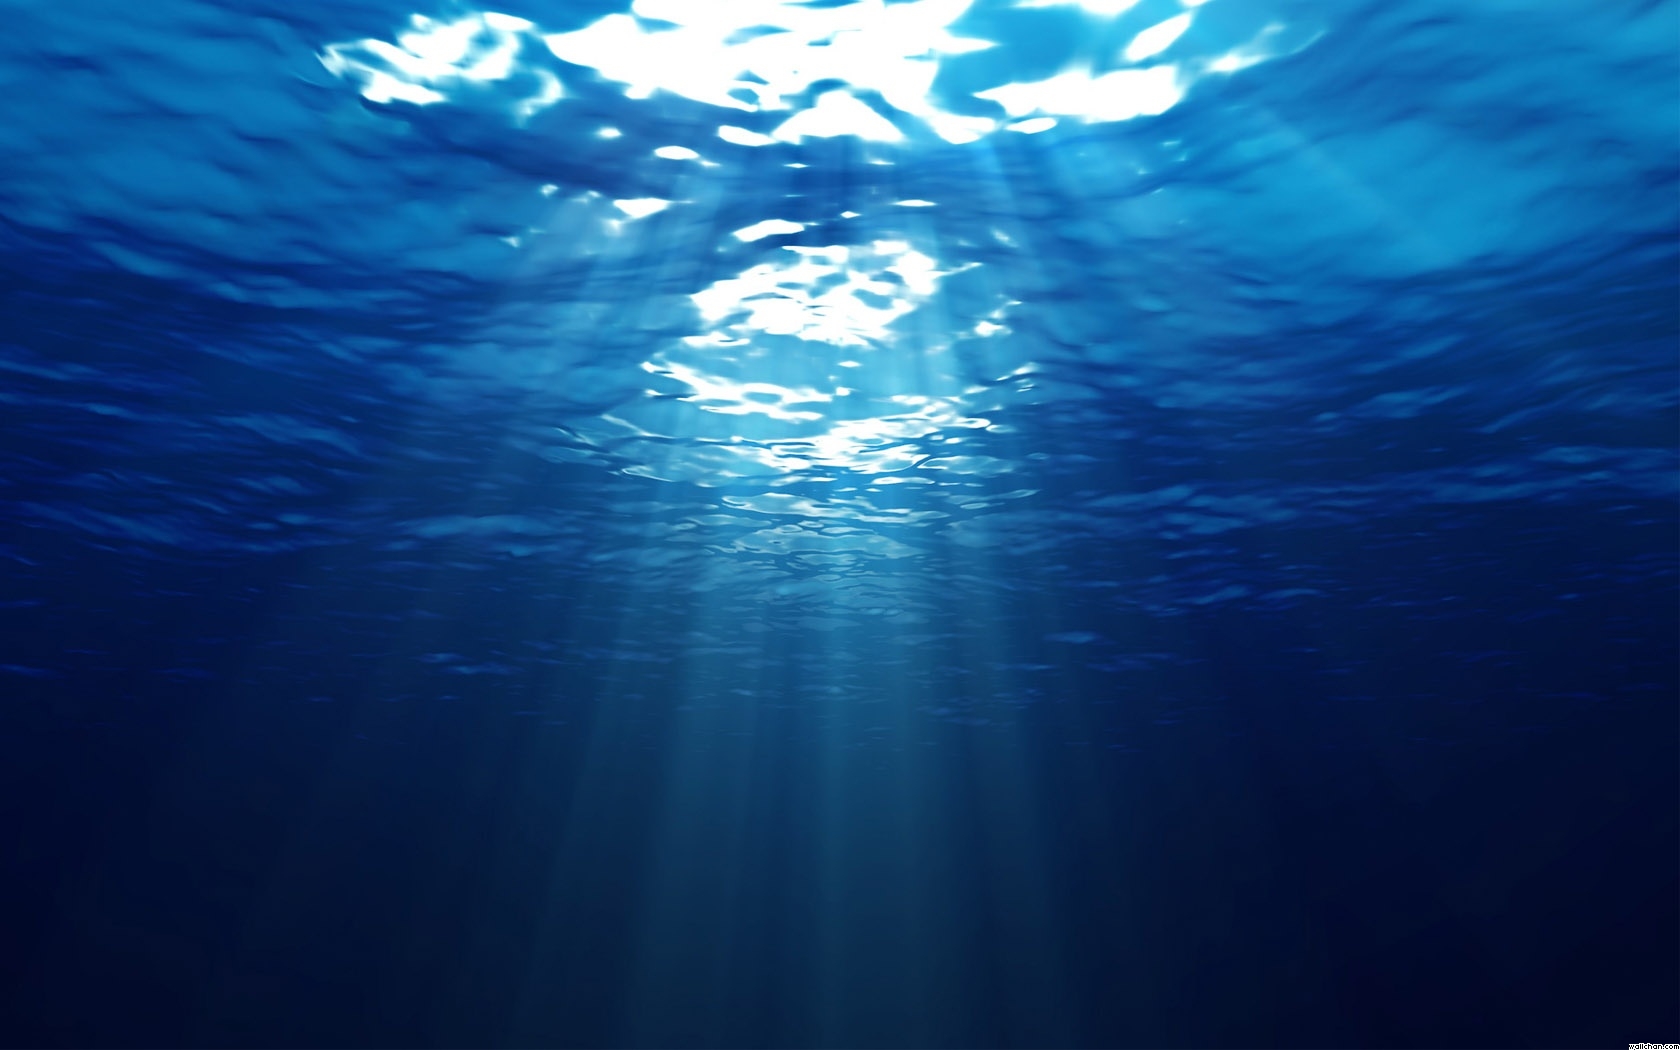 The ocean is made up of 60 different chemical elements that give it